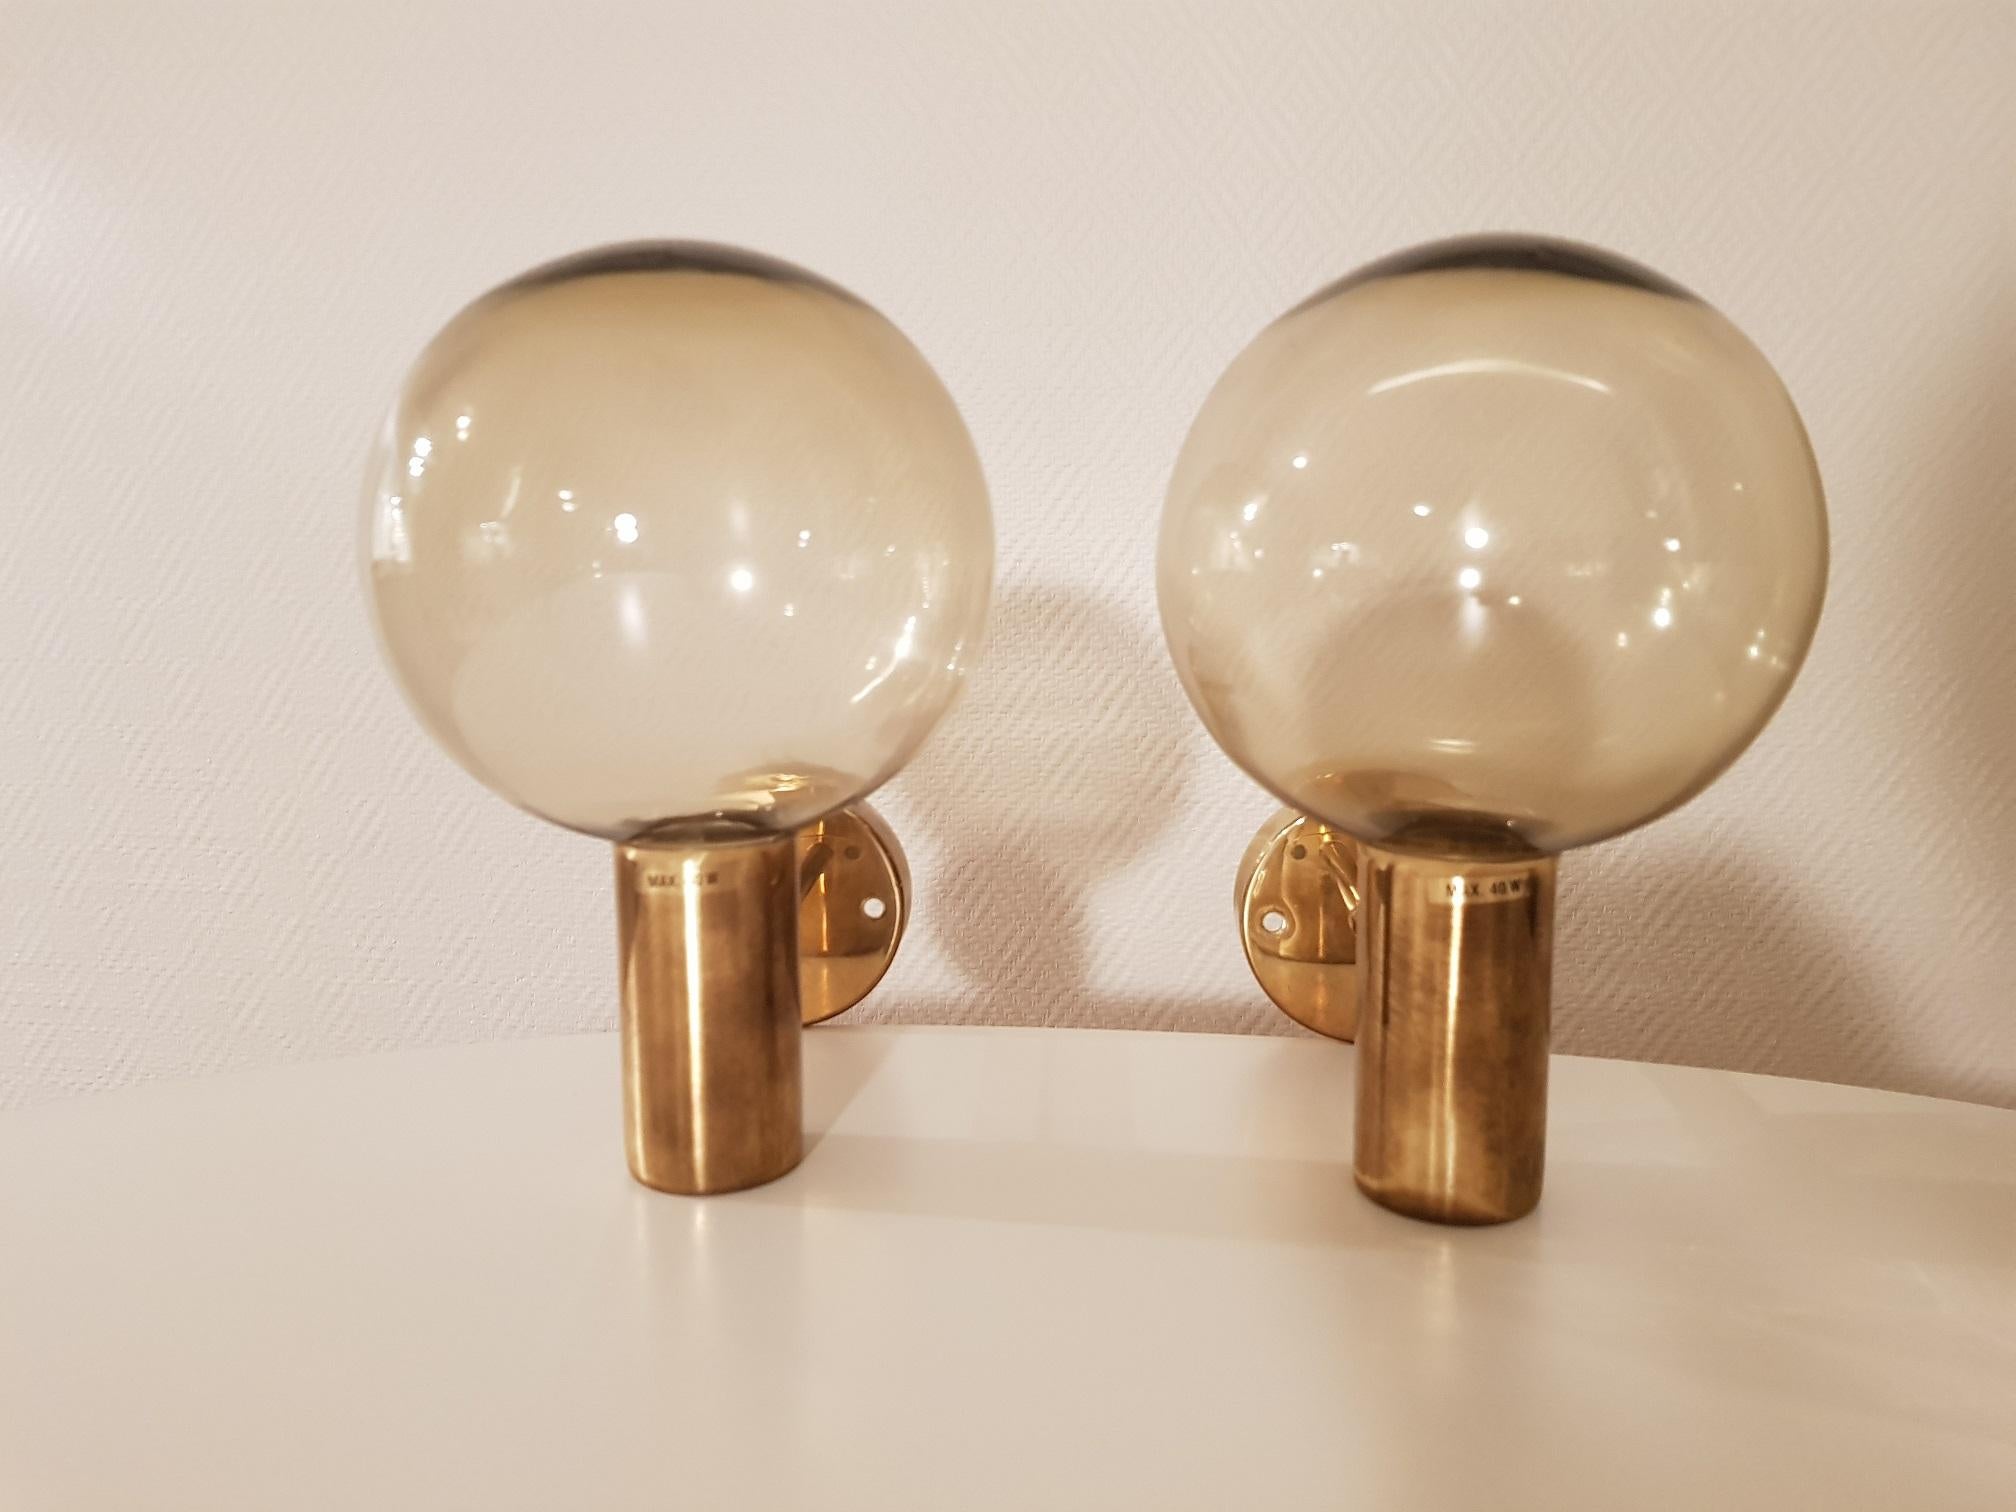 Hans-Agne Jakobsson 2 Brass Wall Lamps 1960s Markaryd, Sweden In Good Condition For Sale In Limhamn, SE